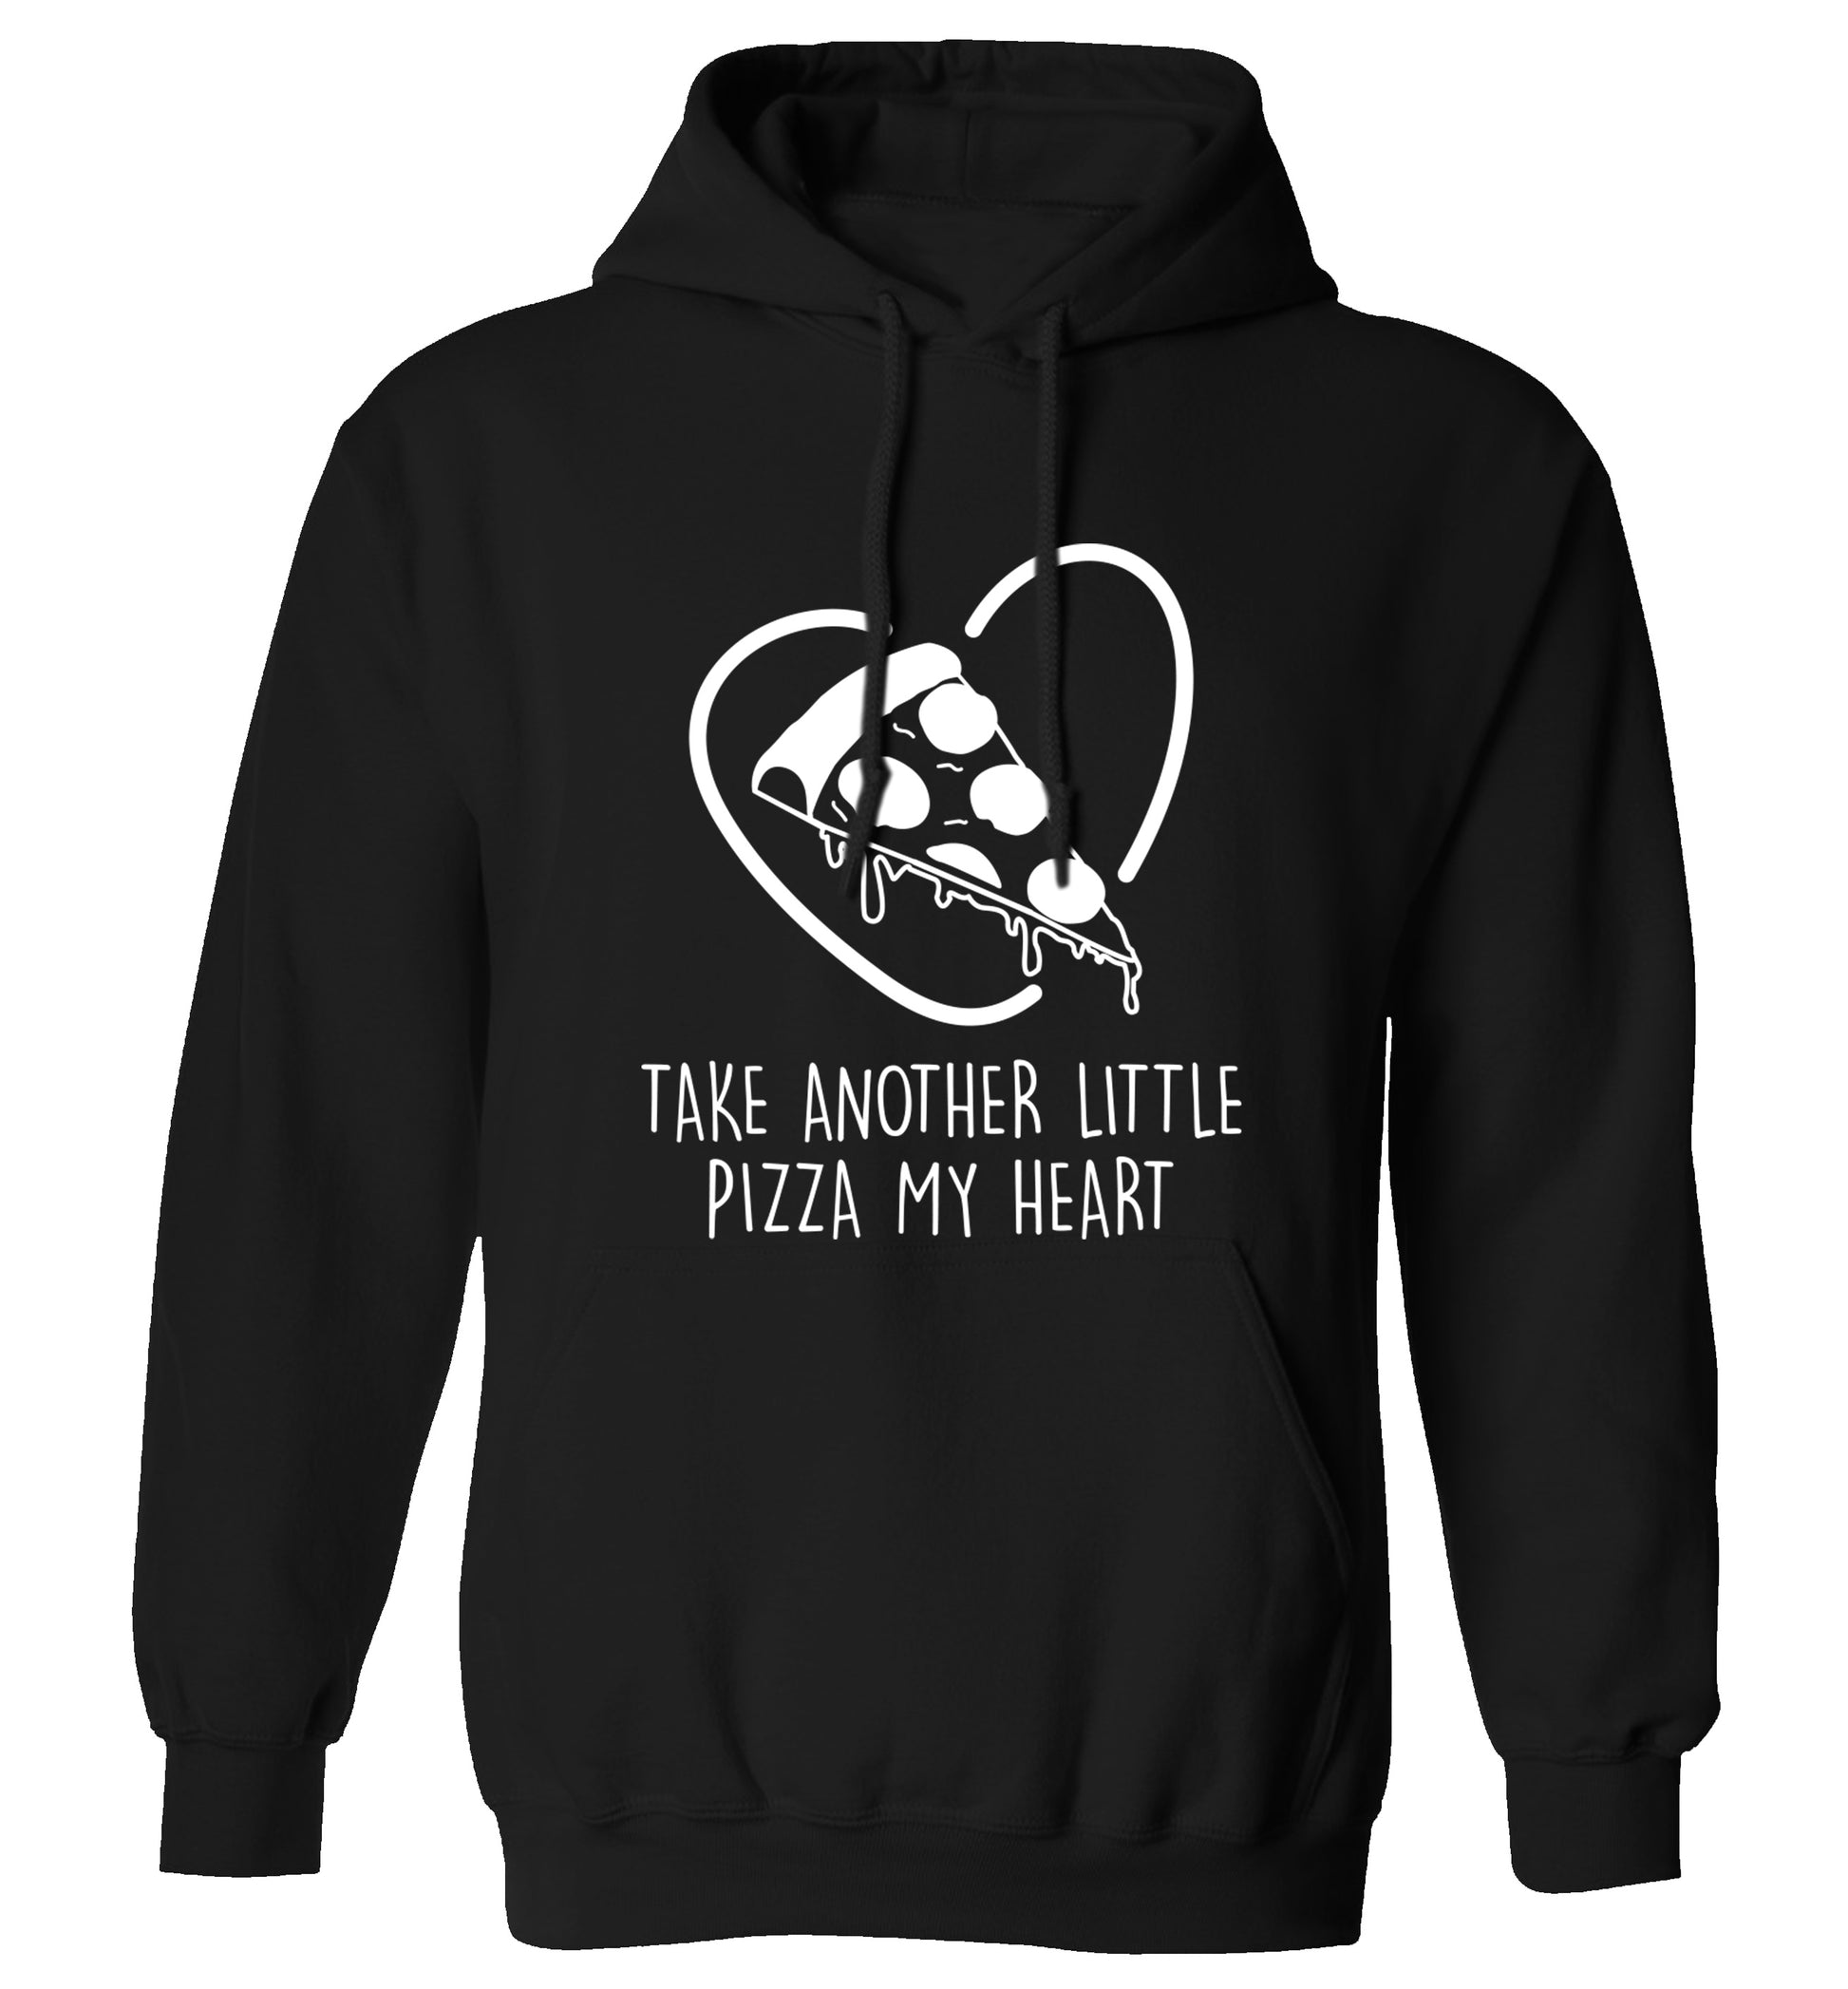 Take another little pizza my heart adults unisex black hoodie 2XL